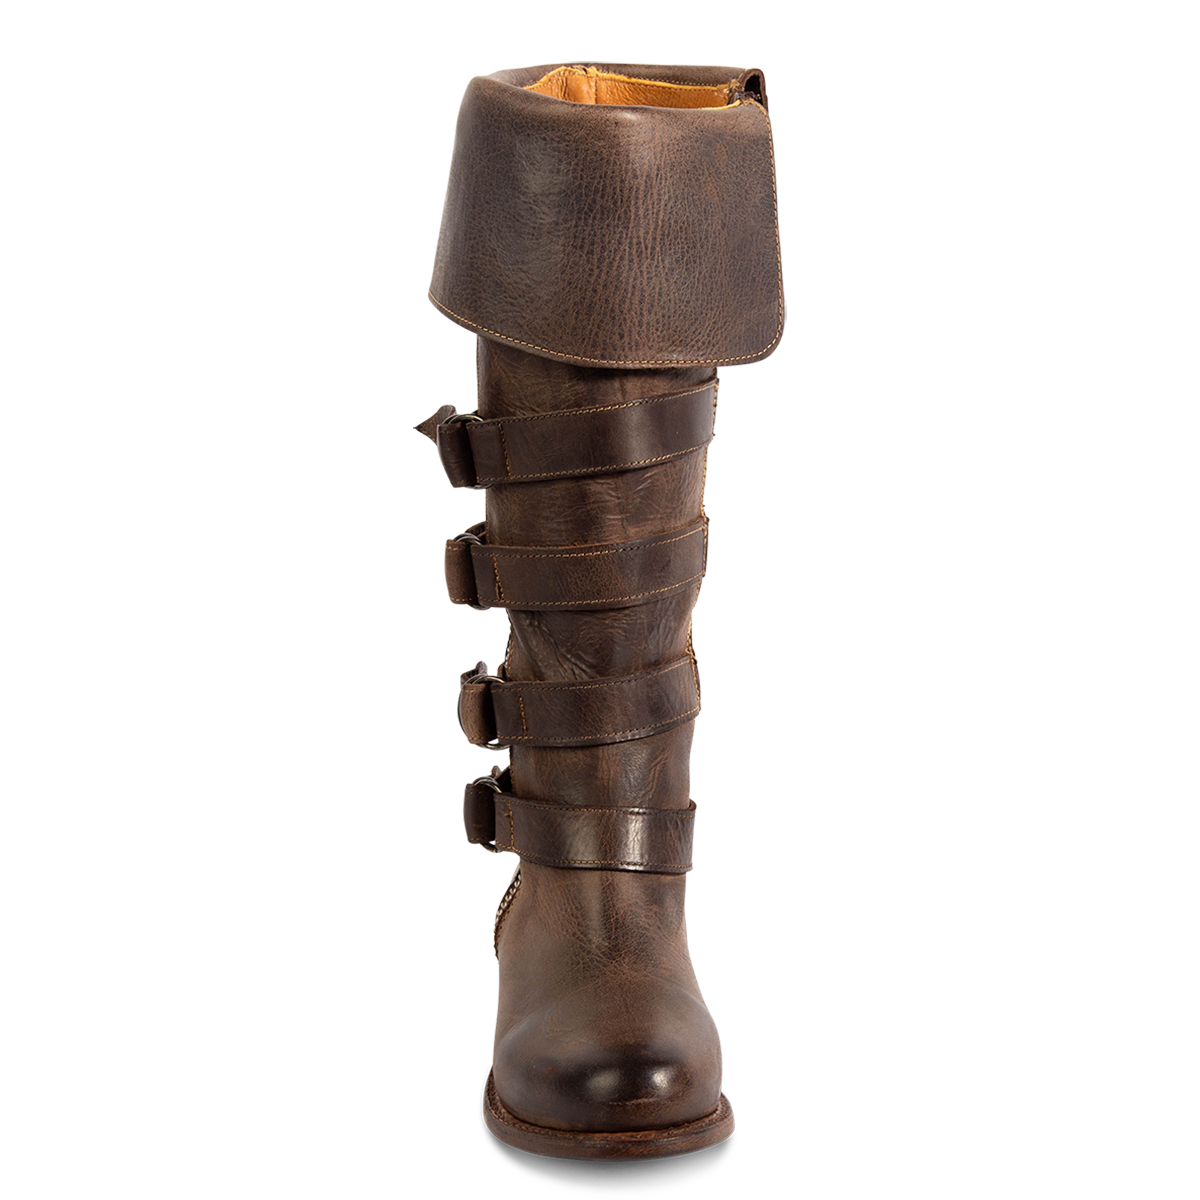 Front view showing tall shaft construction and buckle loops with silver hardware on FREEBIRD women's Risky brown fold-over leather boot